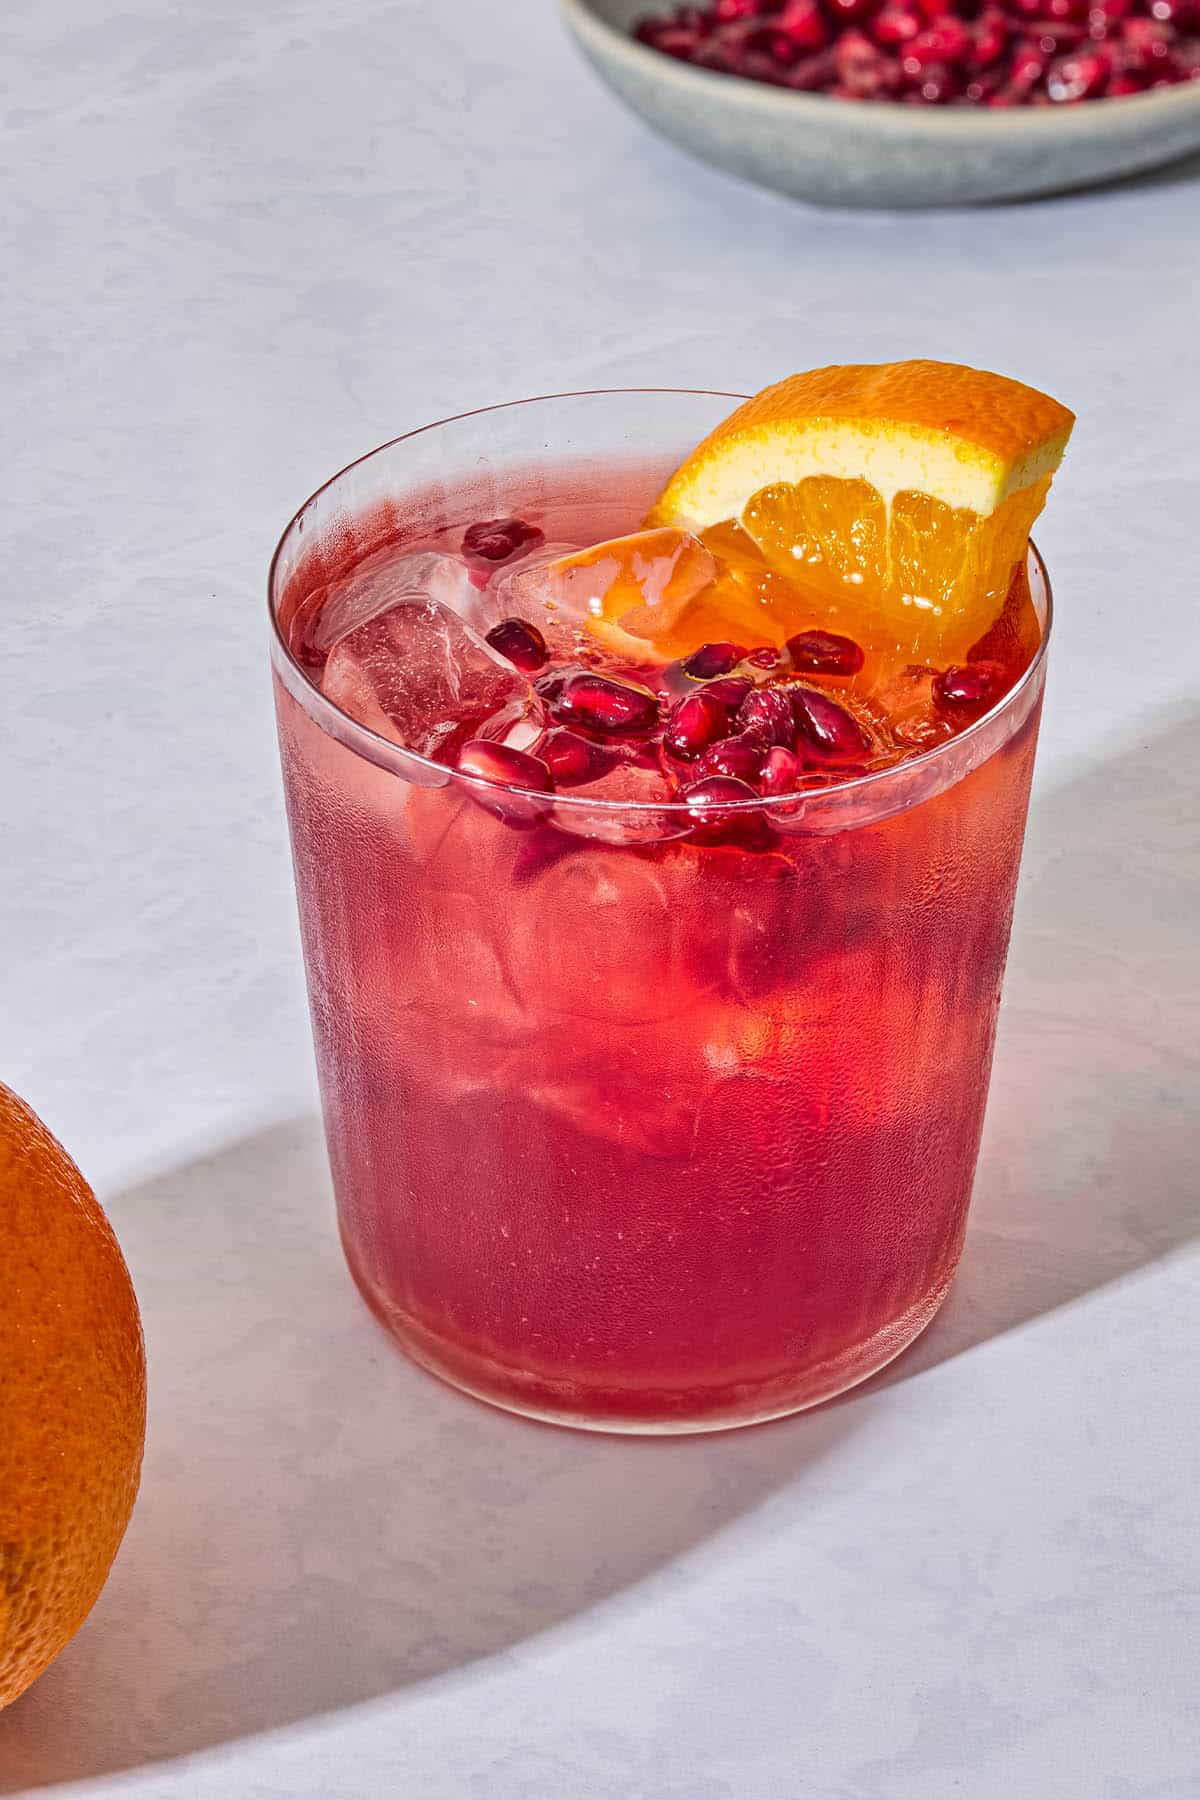 A pomegranate fizz mocktail garnished with pomegranate seeds and an orange wedge.